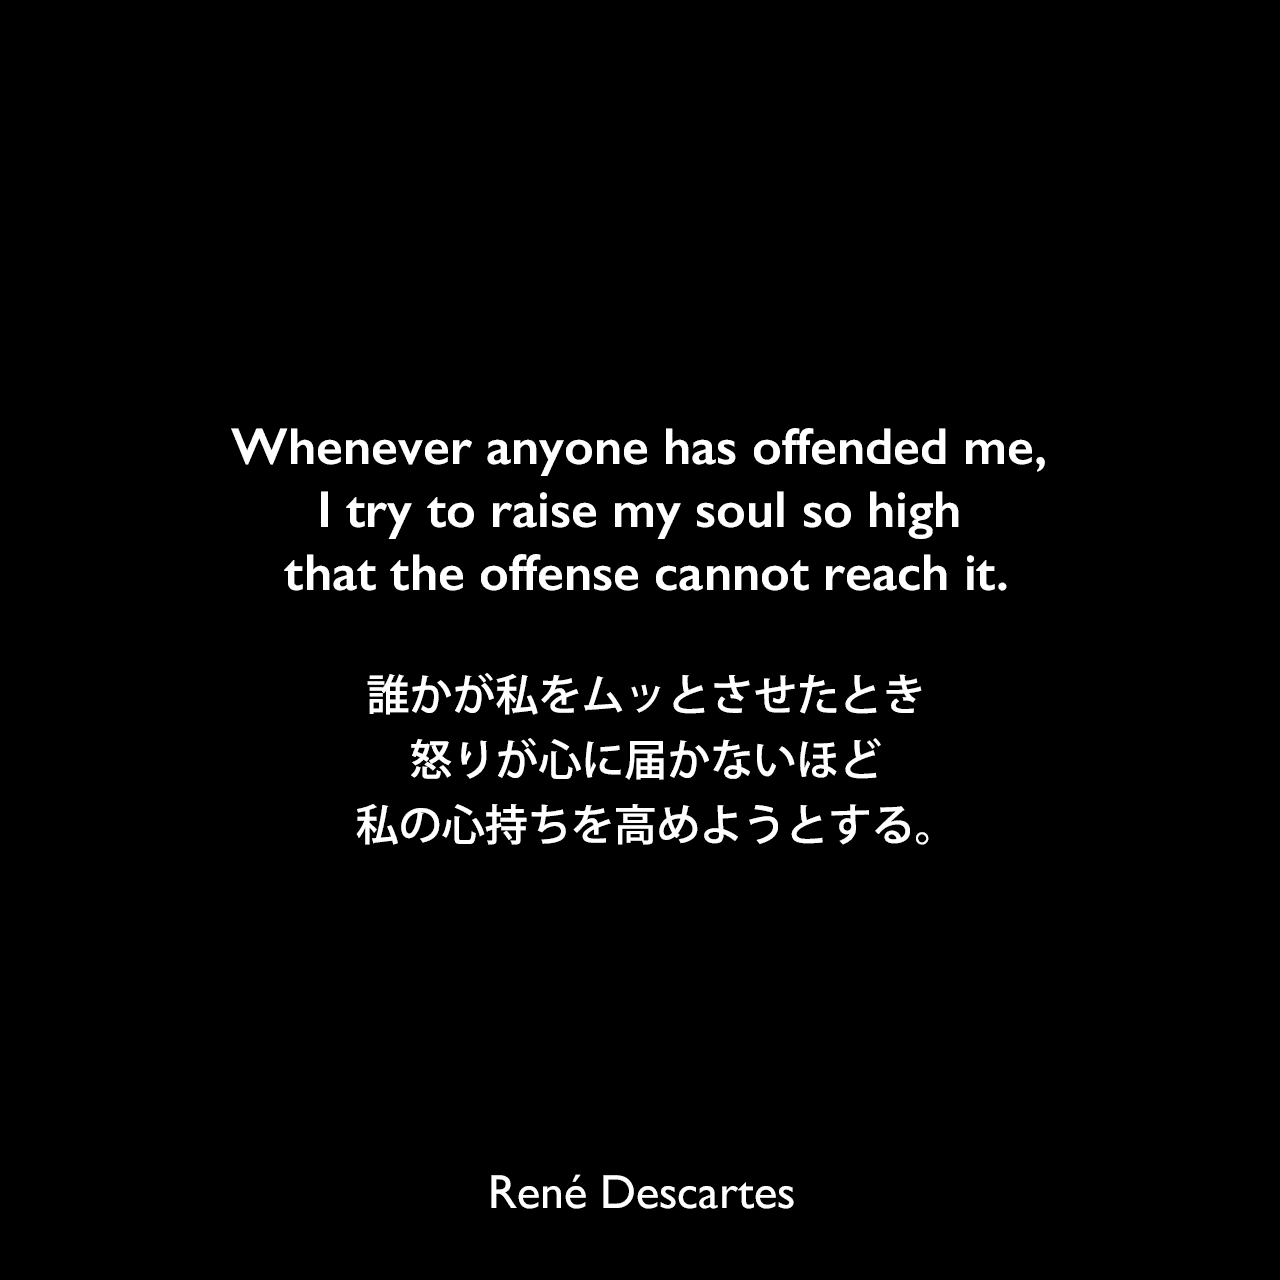 Whenever anyone has offended me, I try to raise my soul so high that the offense cannot reach it.誰かが私をムッとさせたとき、怒りが心に届かないほど私の心持ちを高めようとする。René Descartes